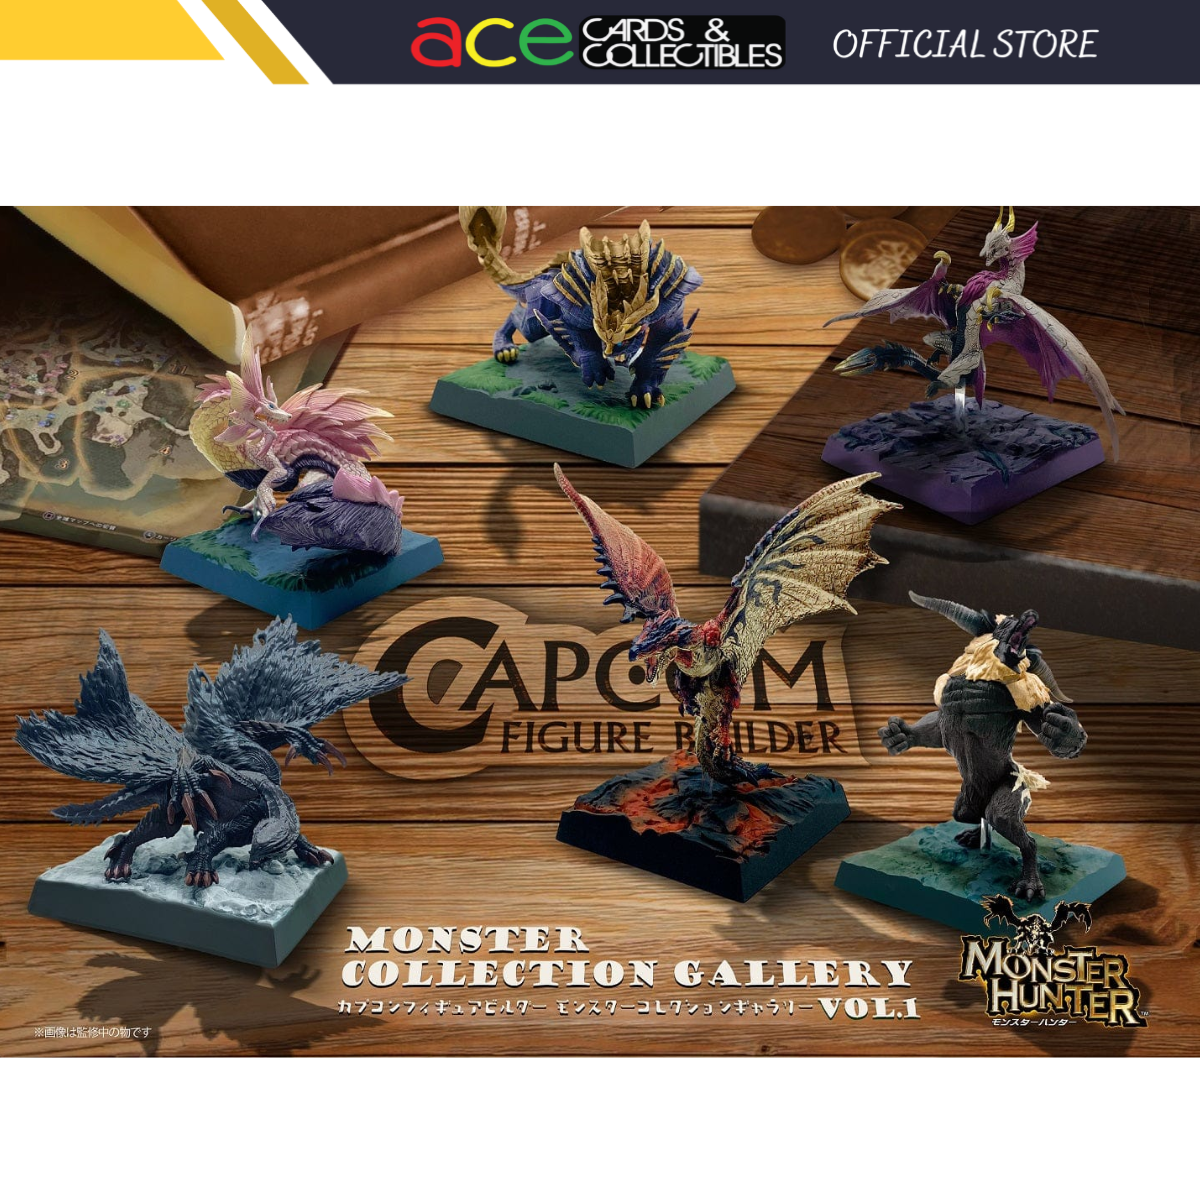 CAPCOM Monster Hunter Figure Builder Collection Gallery Vol.1-Single Box-Capcom-Ace Cards & Collectibles